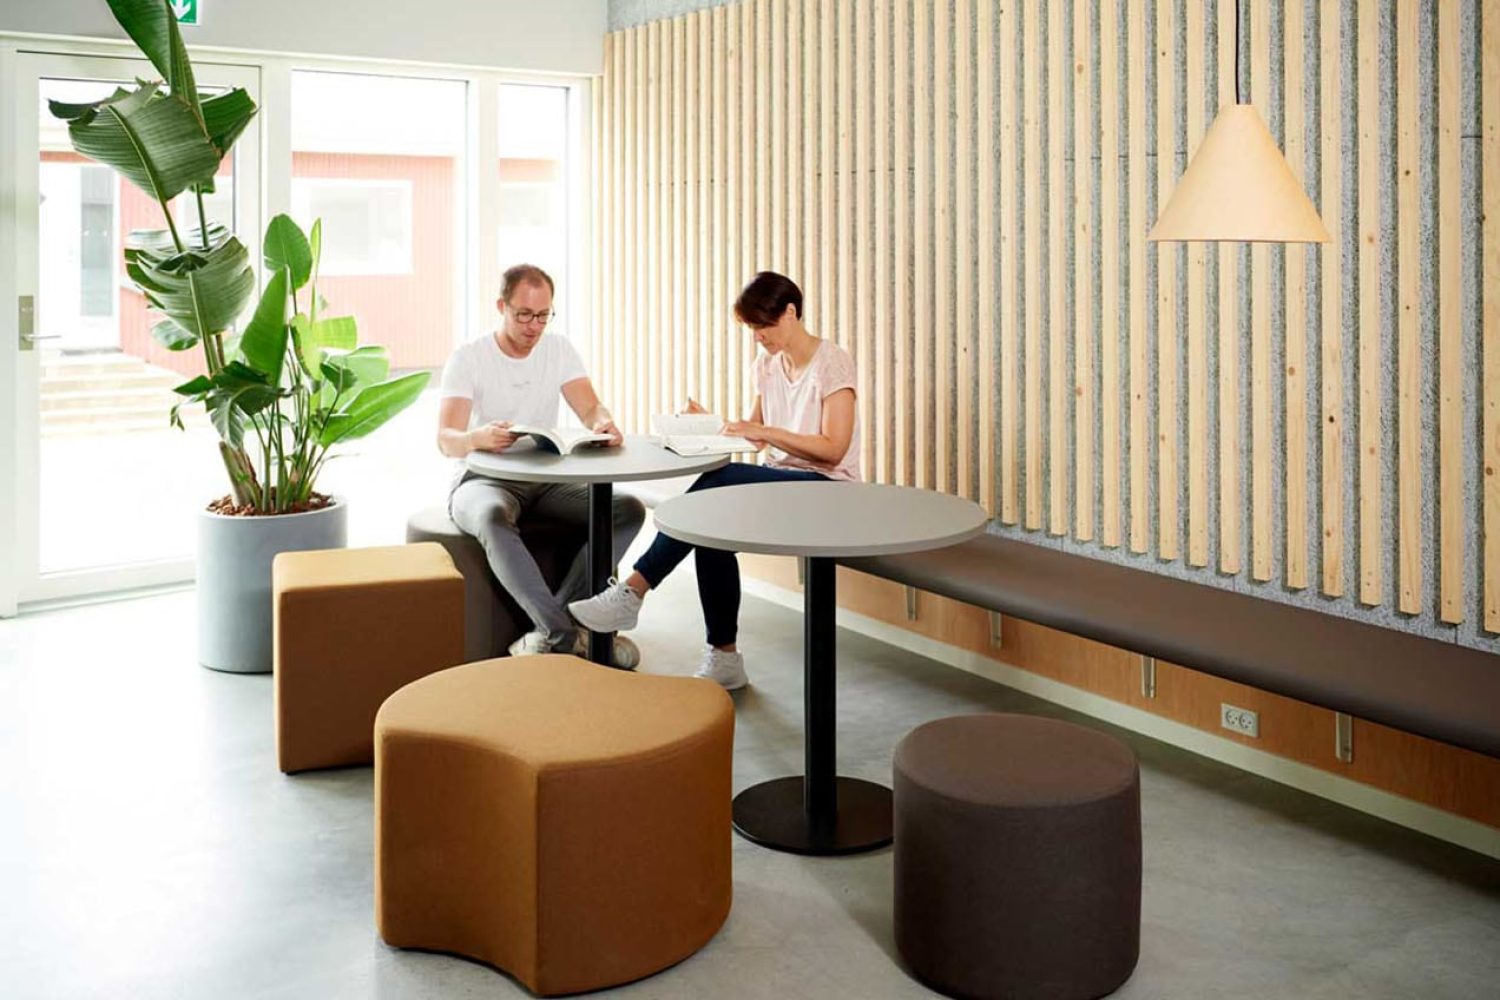 Two people sitting on a wall mounted bench at a table in an office.